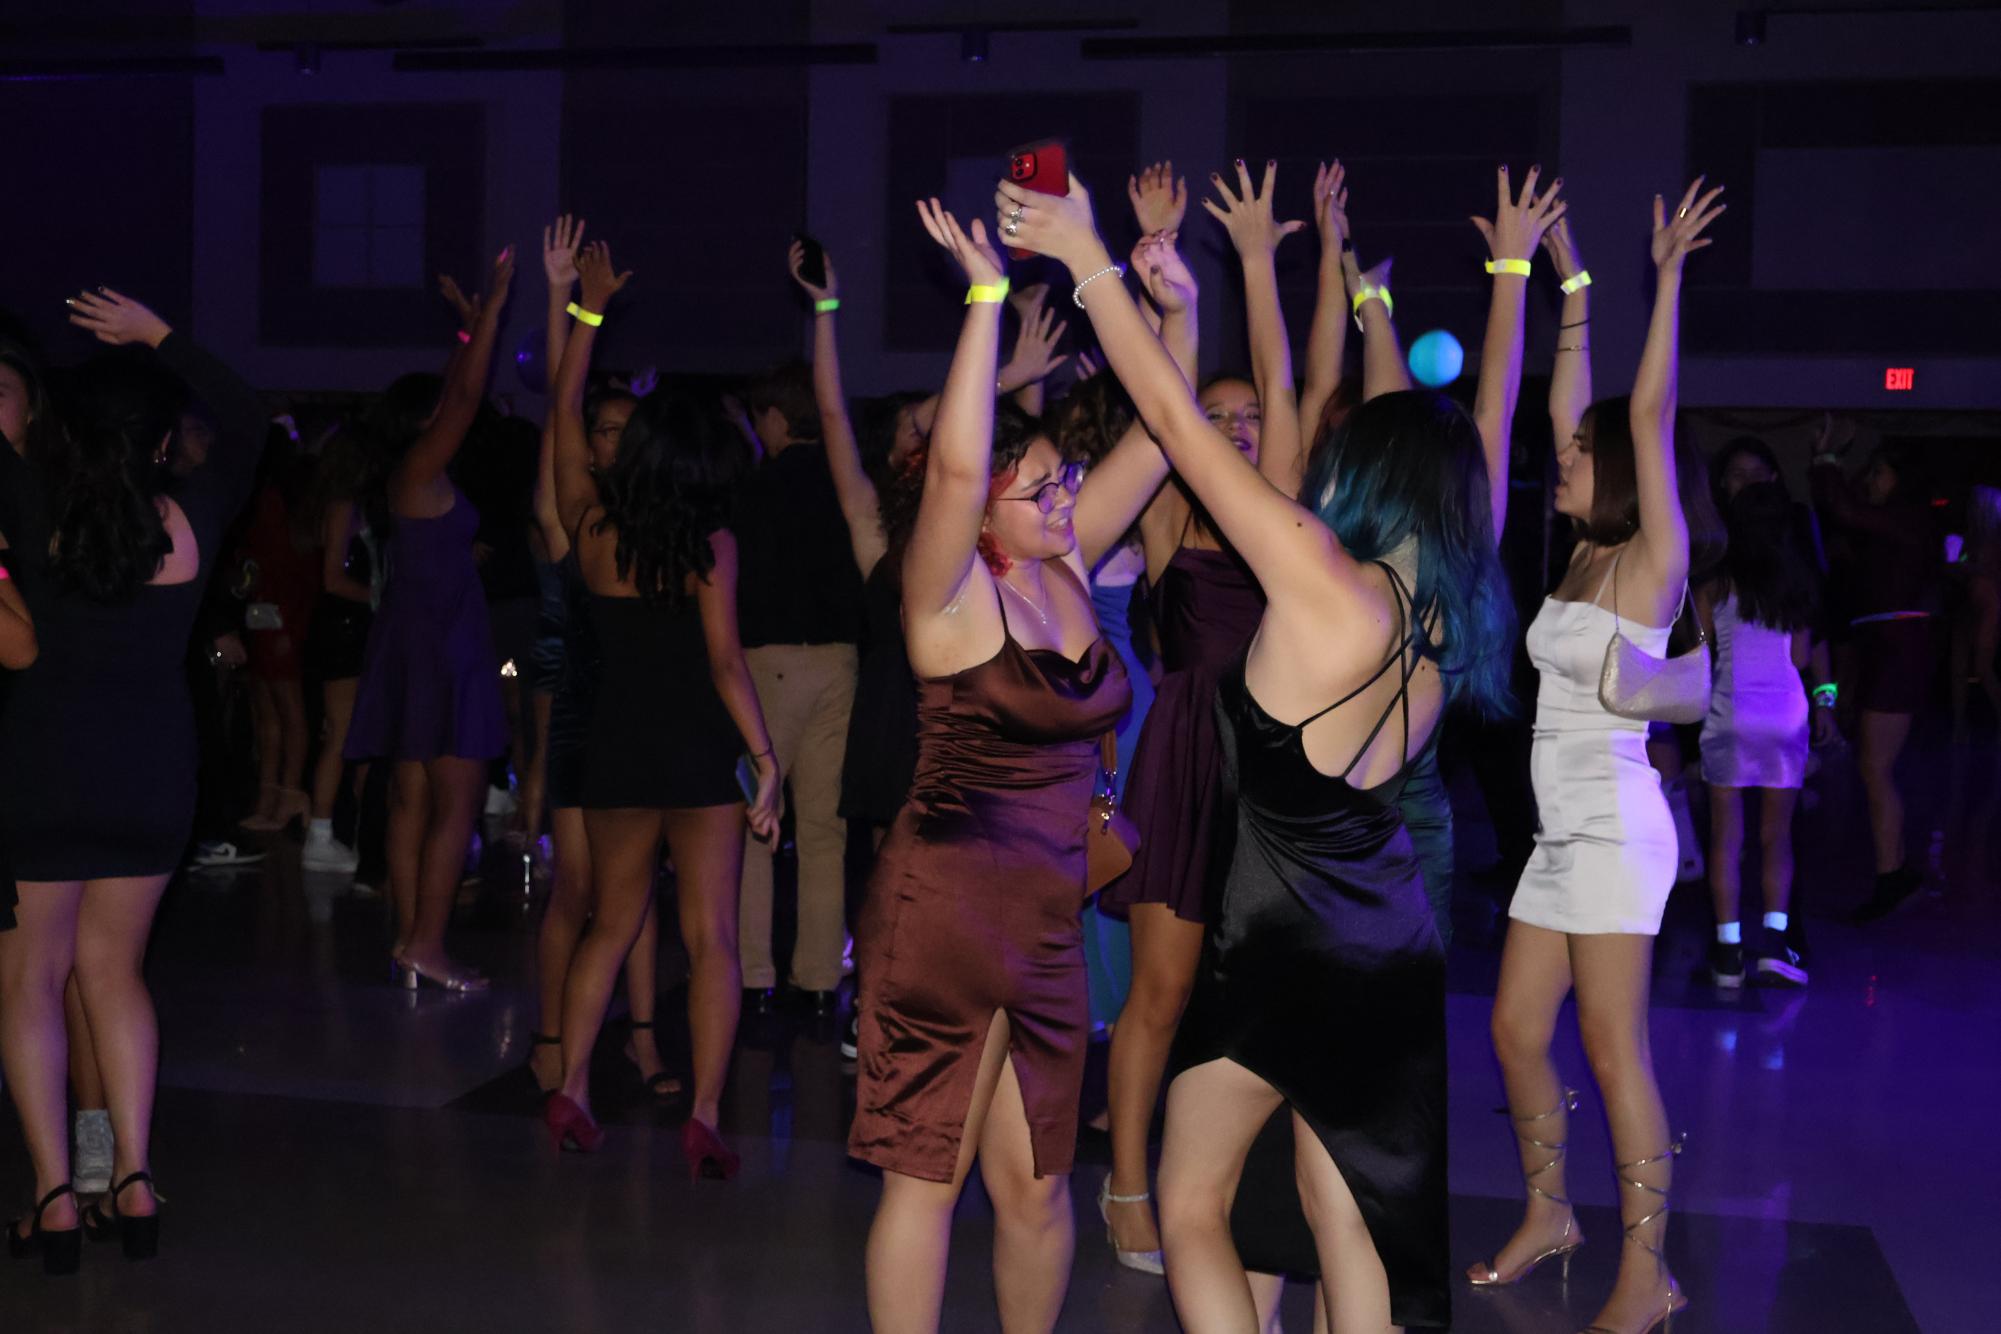 On+Saturday%2C+Oct.+21%2C+students+gathered+in+a+transformed+cafeteria+to+dance%2C+play+casino+games%2C+and+unwind+with+fellow+peers+at+the+annual+Homecoming+Dance.%C2%A0This+year%E2%80%99s+theme+was+%E2%80%9CLet%E2%80%99s+Glow+Crazy%E2%80%9D+and+the+campus+was+decked+out+with+blacklight+and+neon+illustrations+to+represent+it.